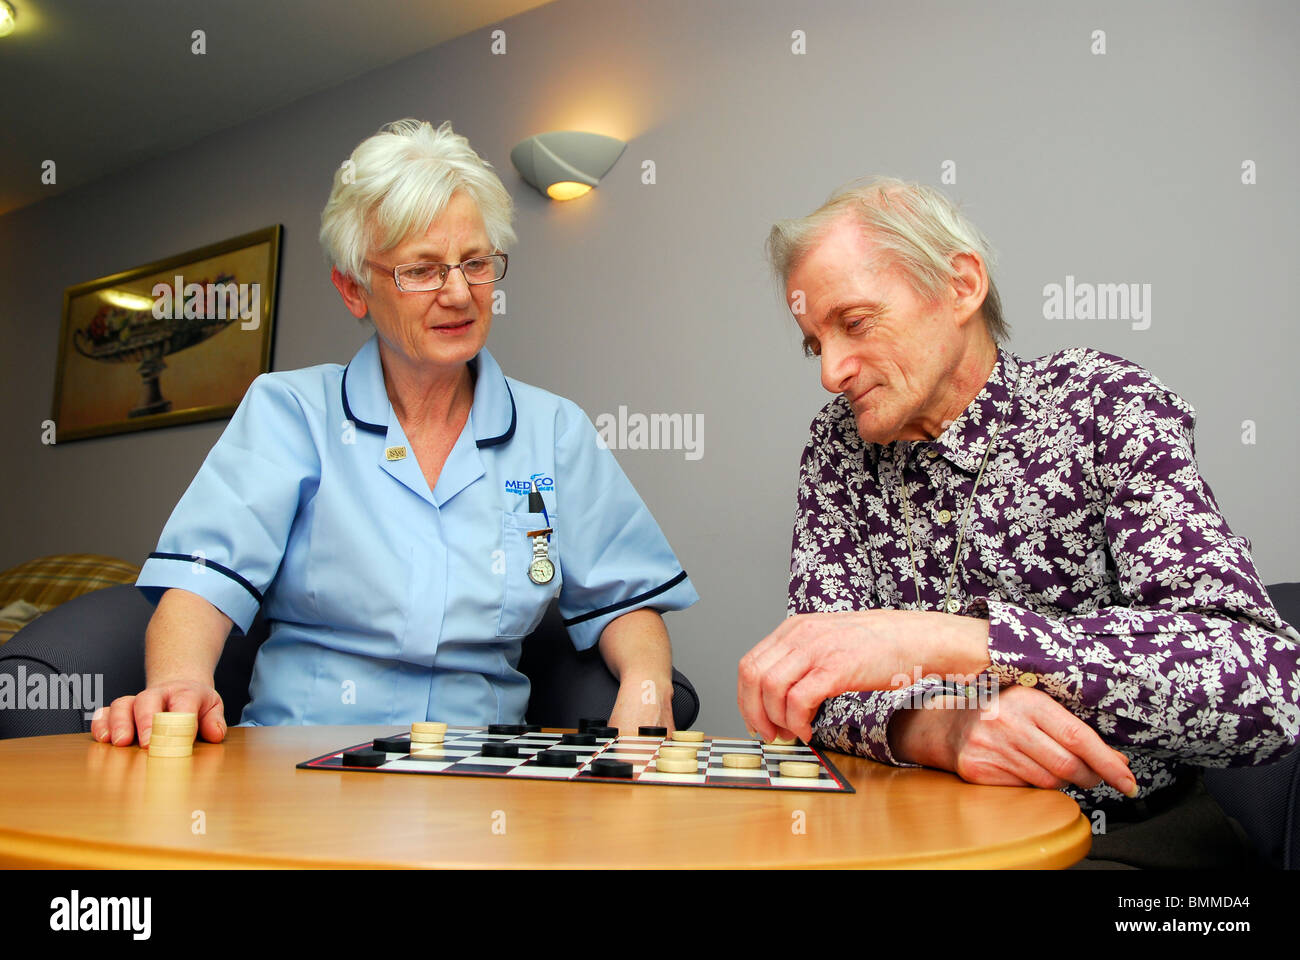 Healthcare worker playing a board game with an elderly resident at an old people's home, Wirral, UK. Stock Photo